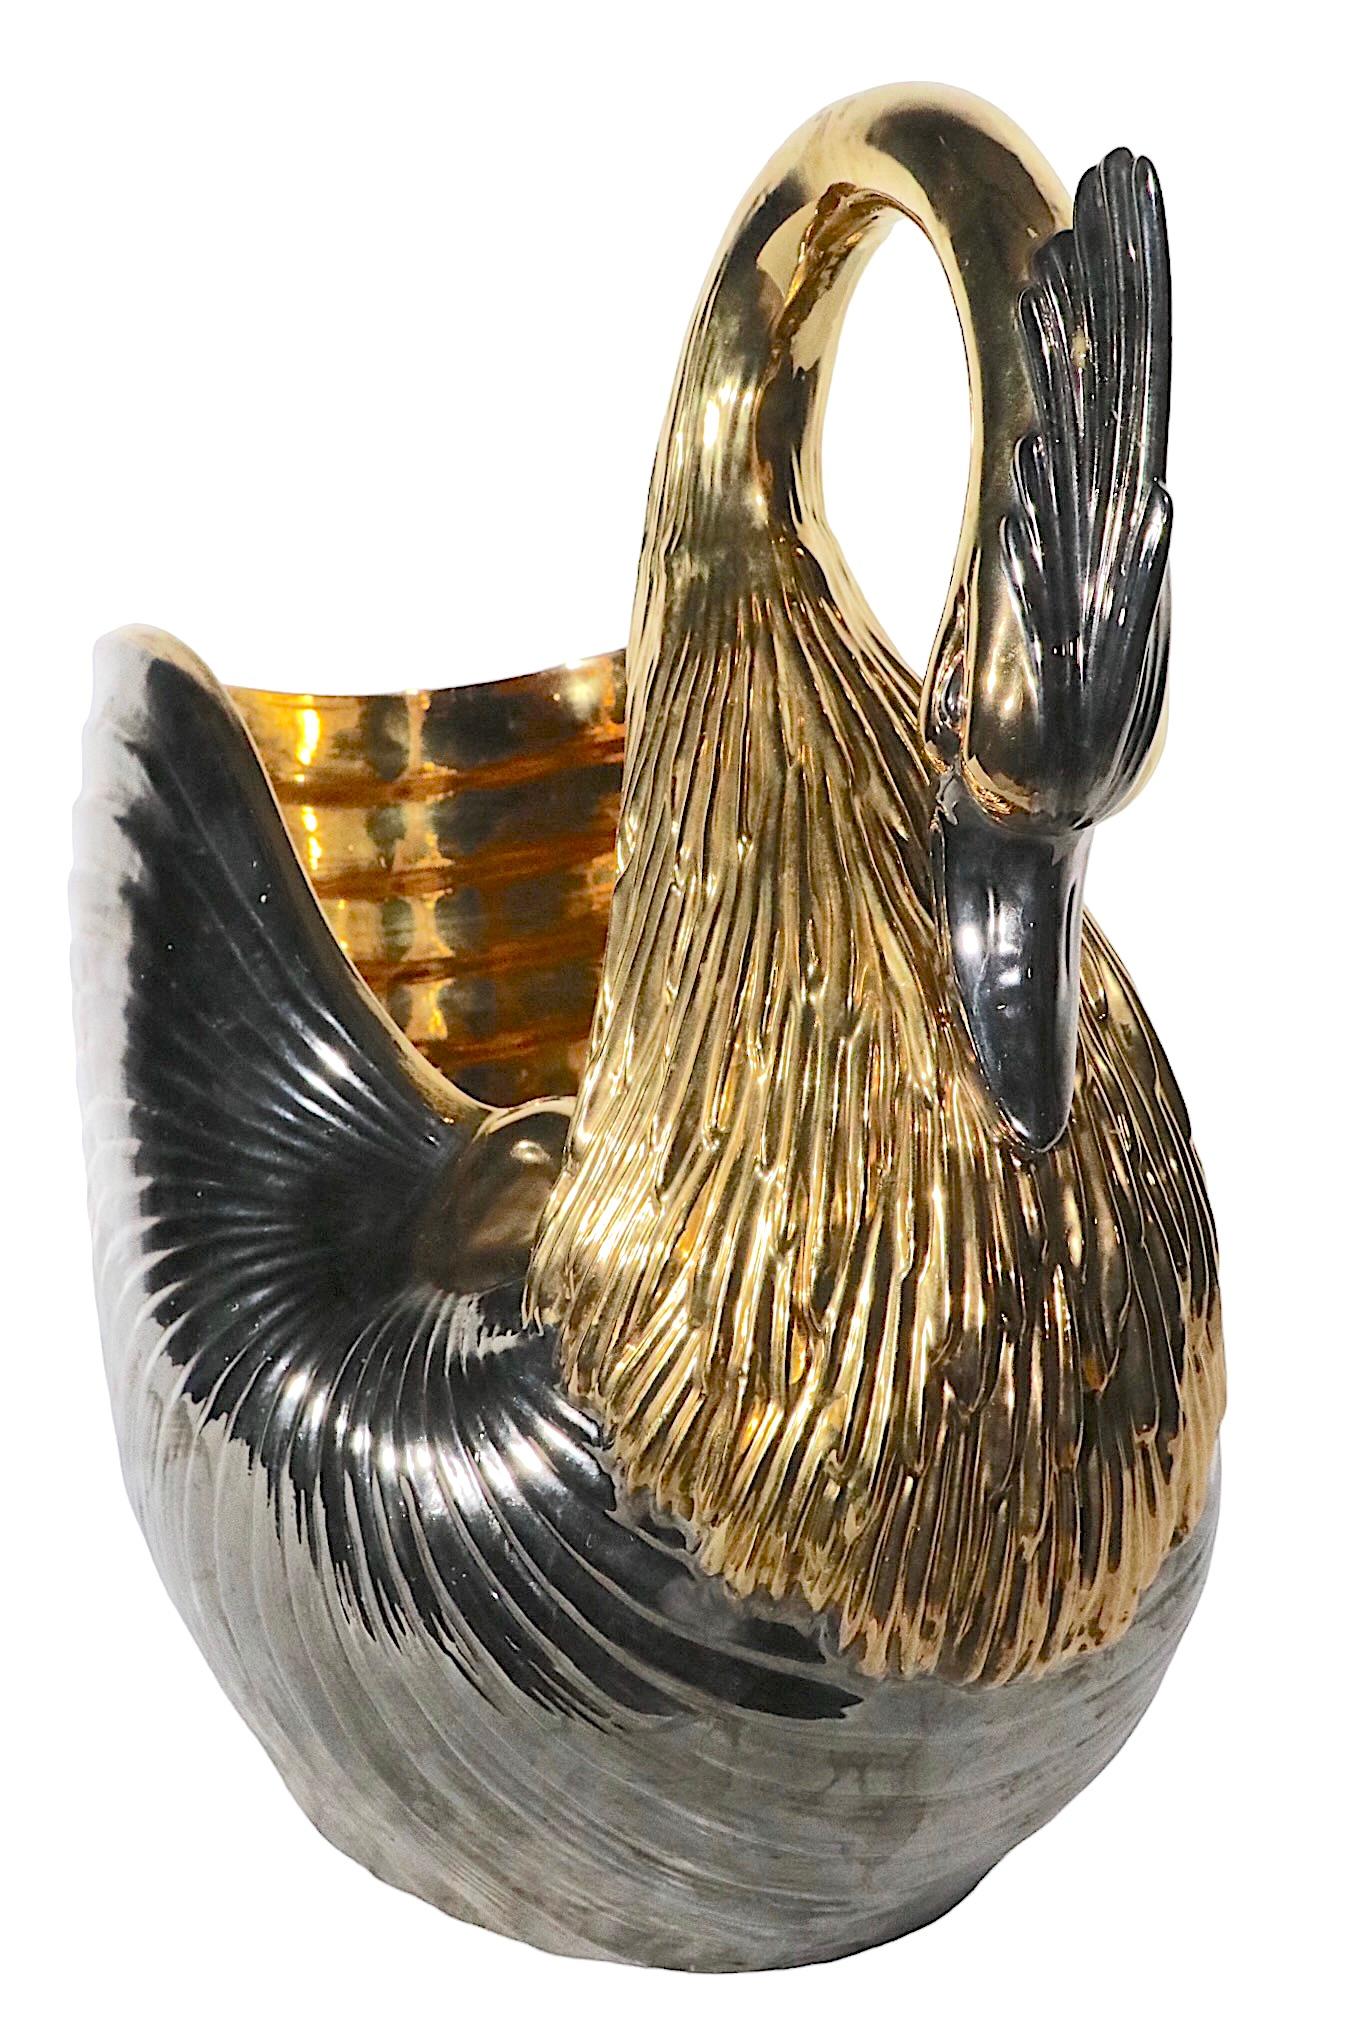 Stunning porcelain swan, executed in brilliant gold luster and dark silver glazes. This impressive statement piece will surely complete any interior space it inhabits. Made in Italy, probably Venetian, circa 1970s. The crown of the swan shows an old